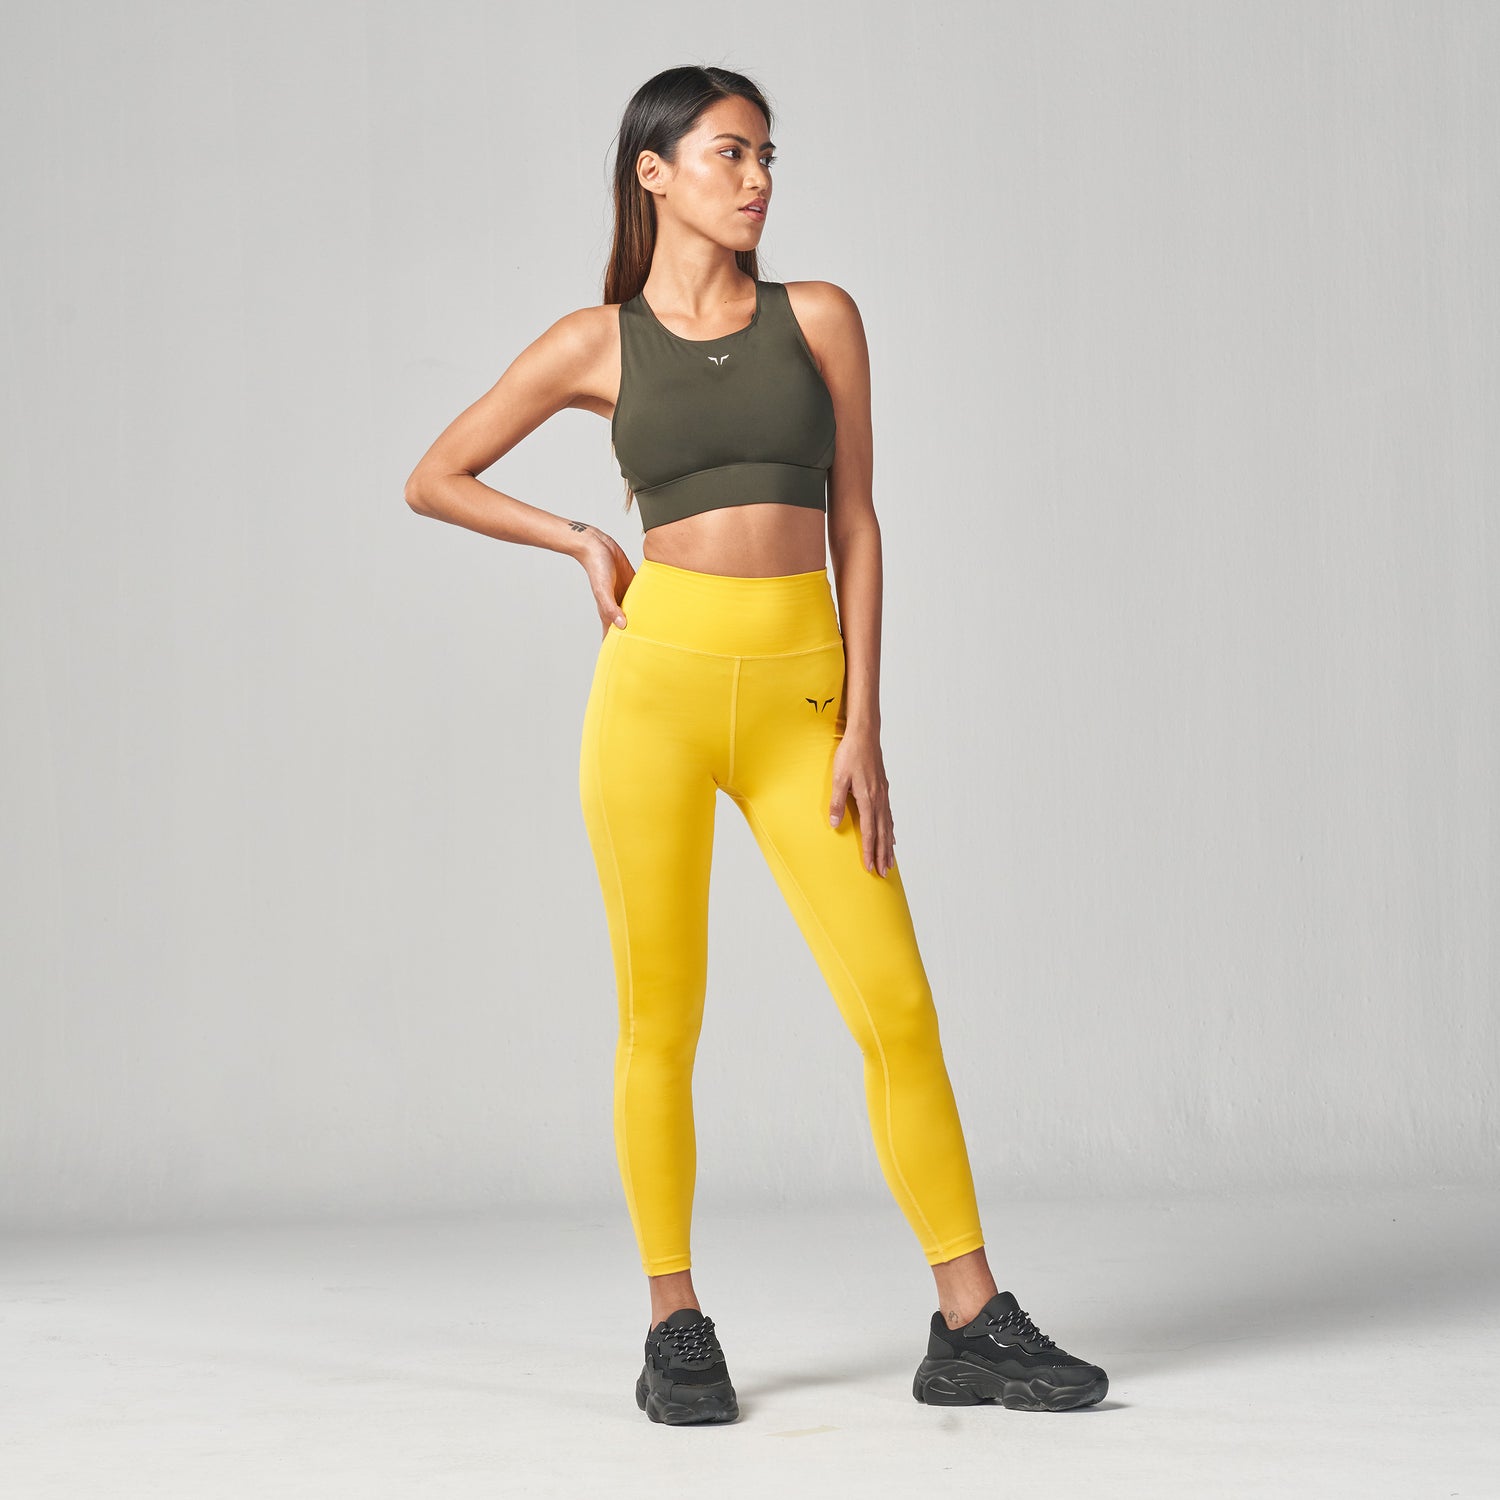 What Are Cropped Gym Leggings?